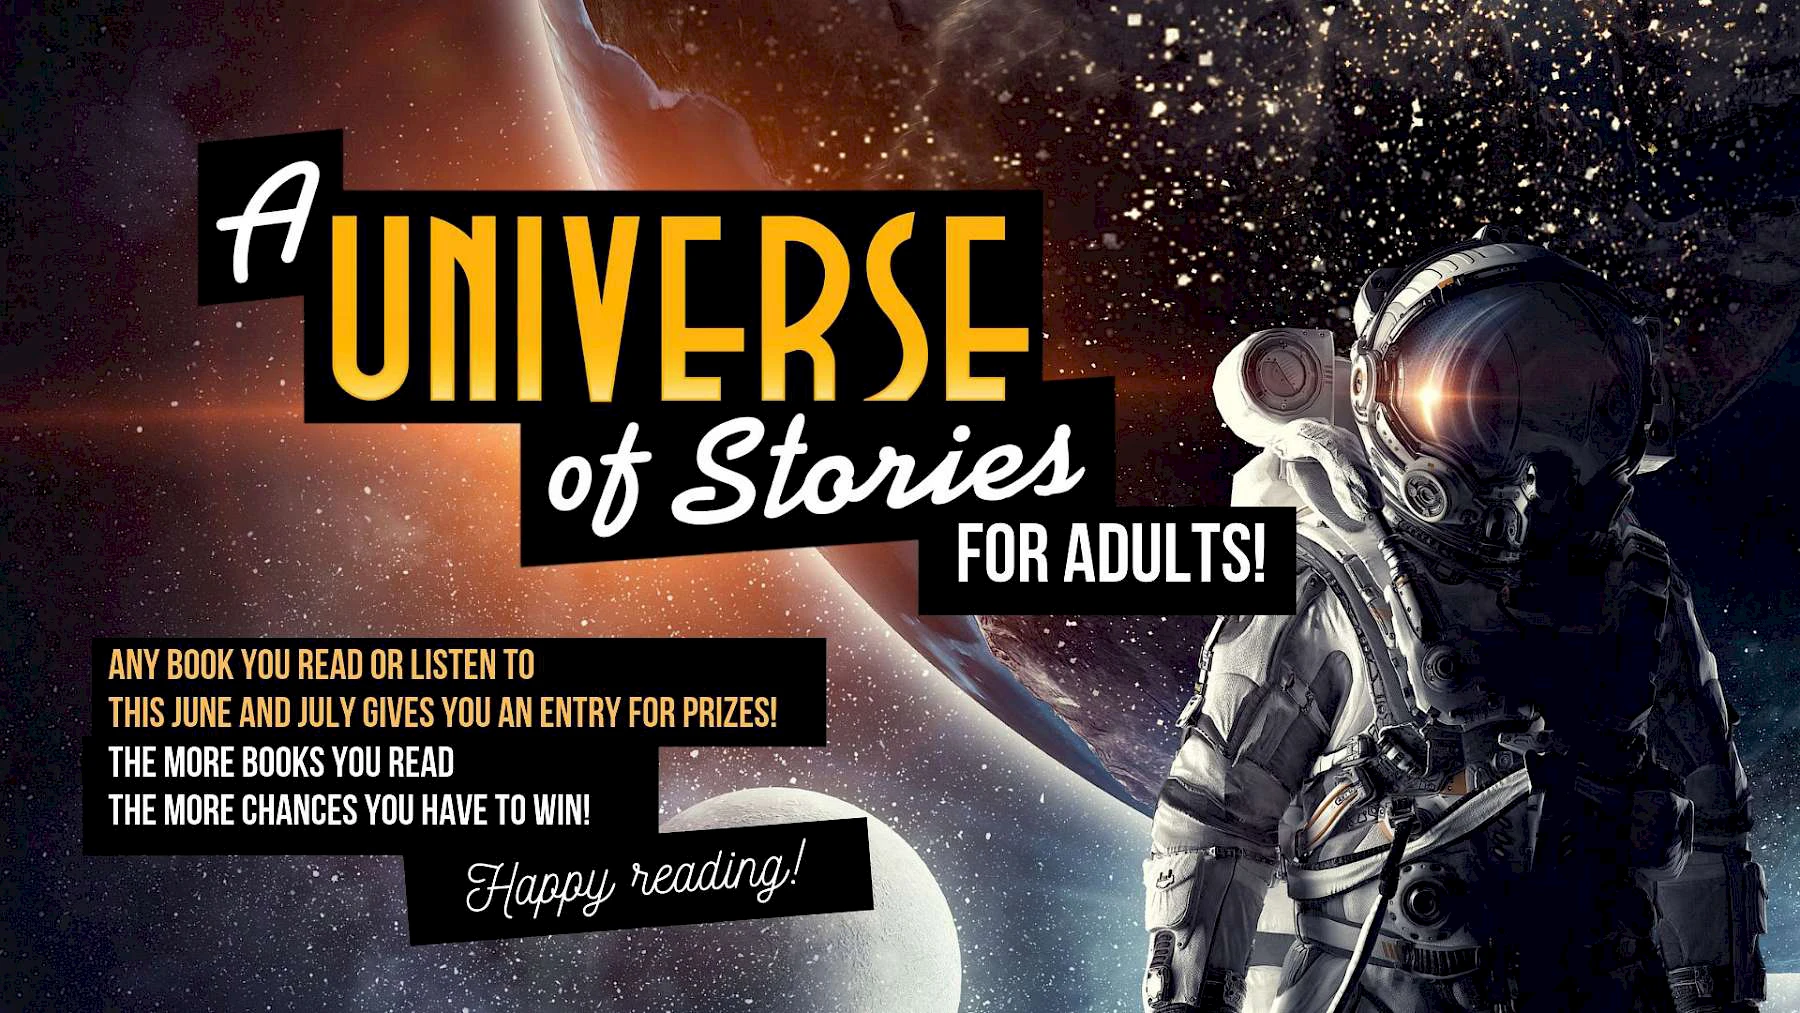 A Universe of Stories for Adults! Any book you read or listen to this June and July gives you an entry for prizes! The more books you read the more chances you have to win! Happy Reading!